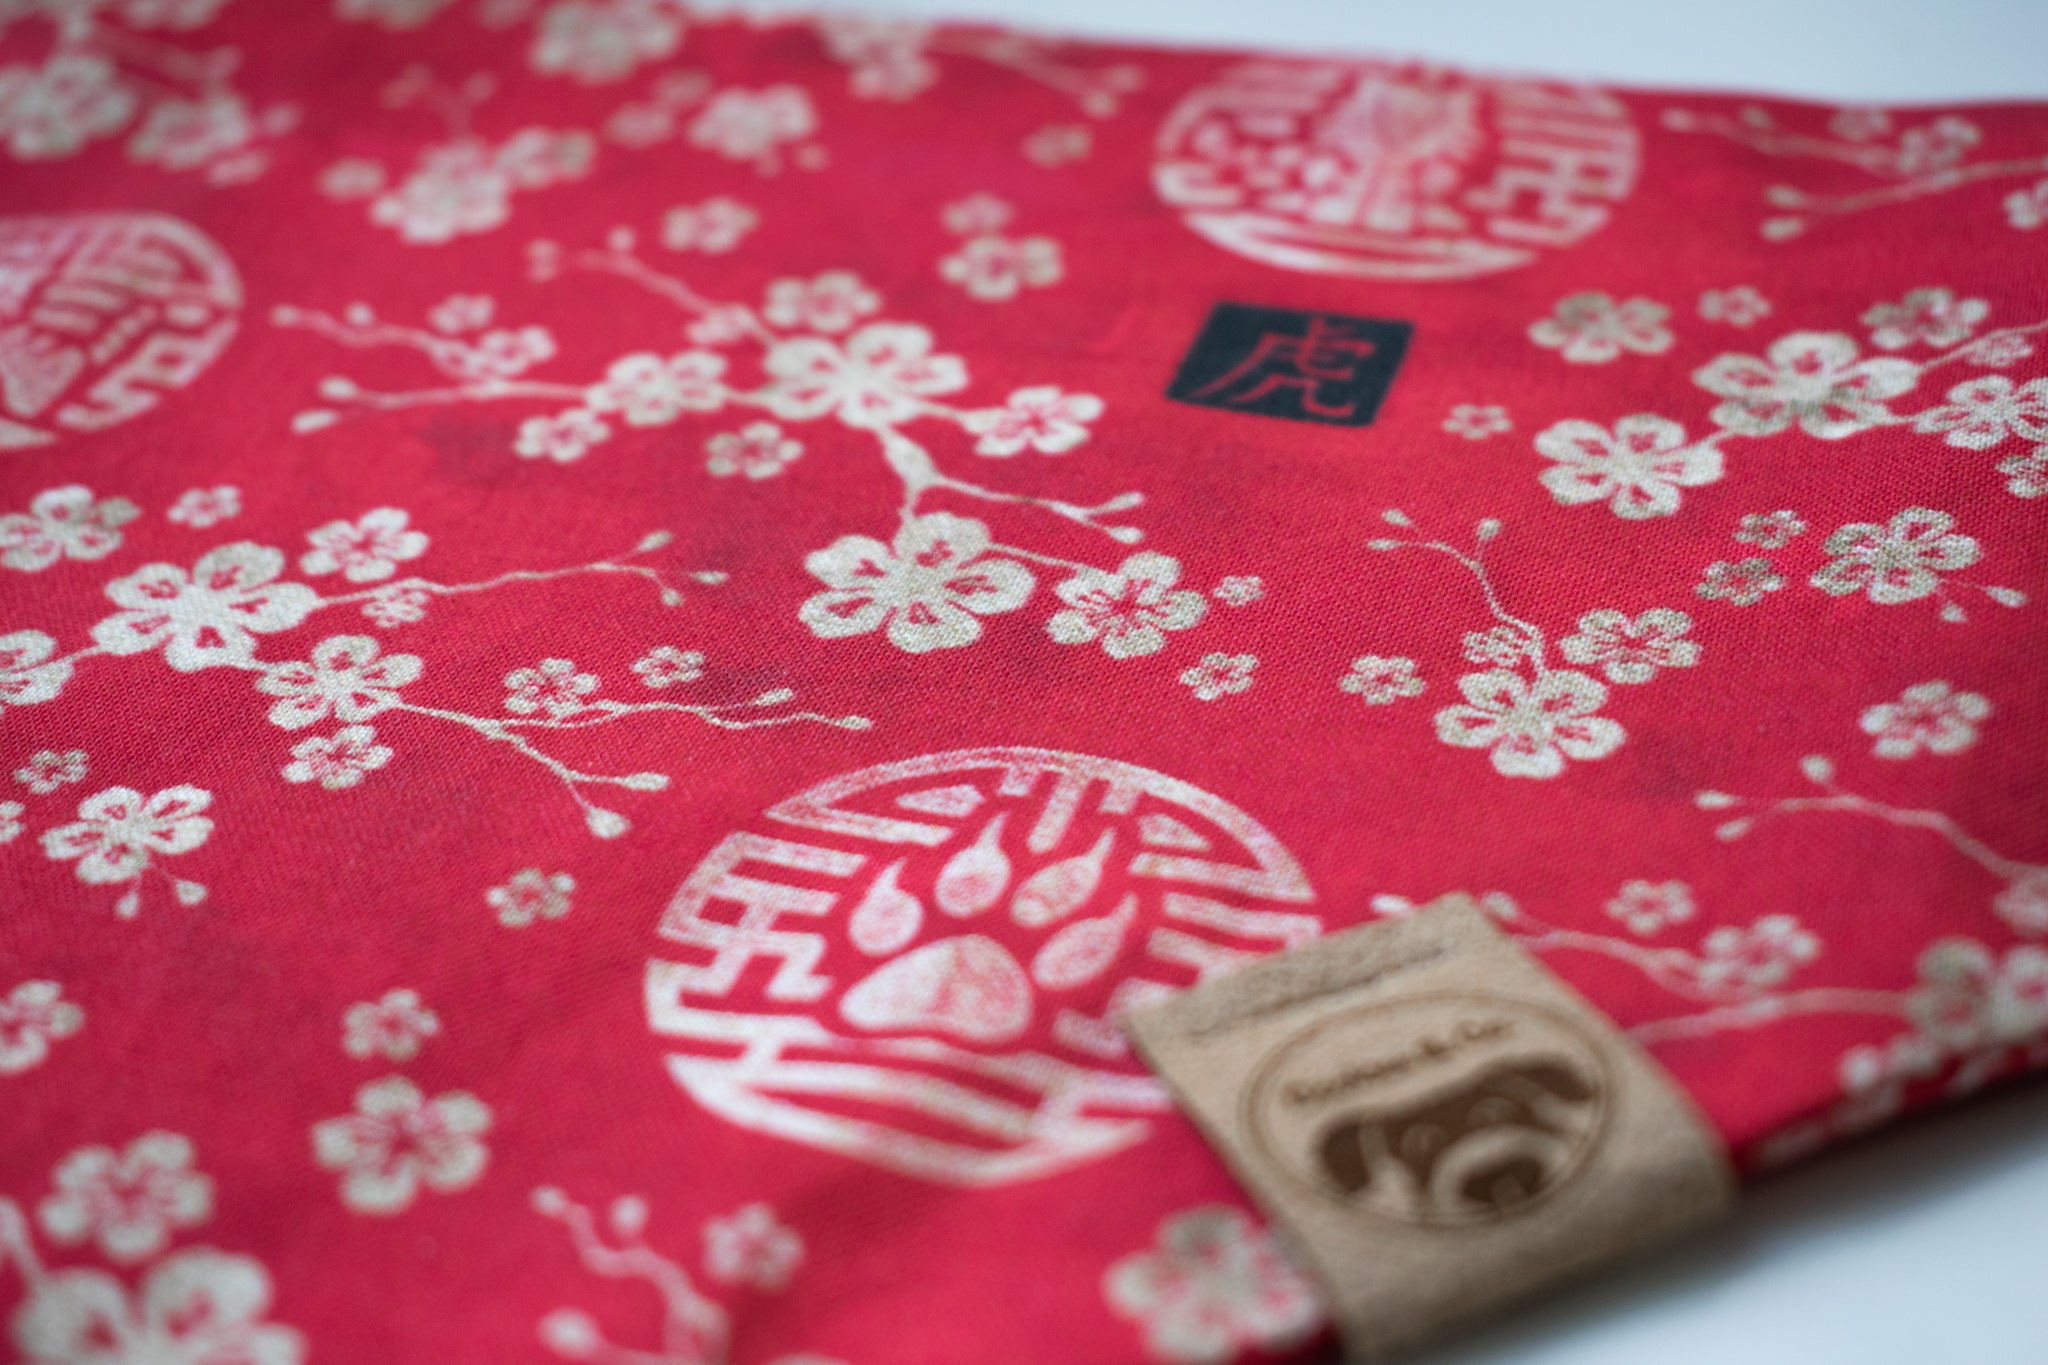 Year of the Tiger - Dog Bandana Tie-On with Snap Buttons